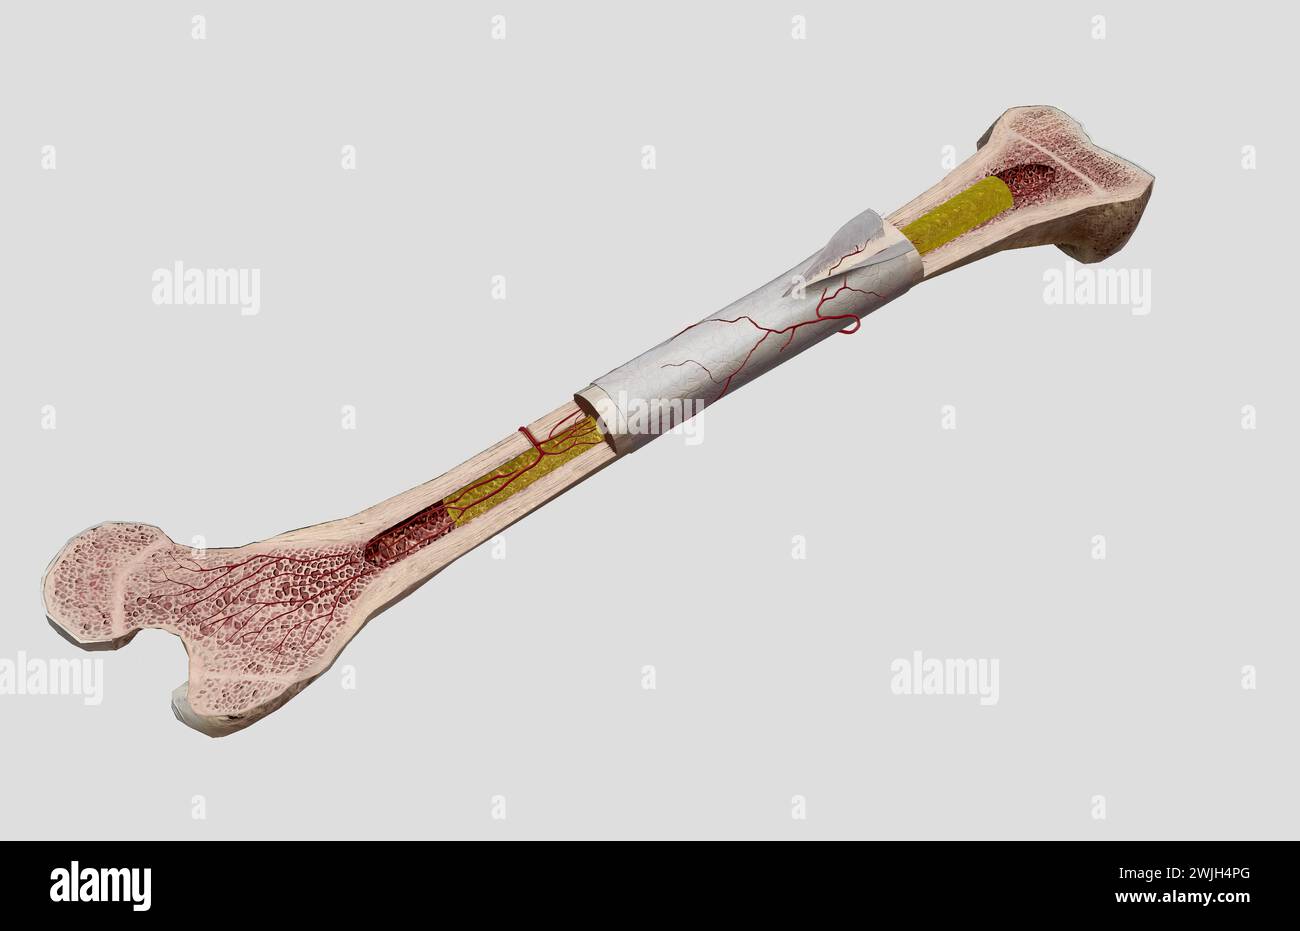 The Cross sectional femoral bone 3D rendering Stock Photo